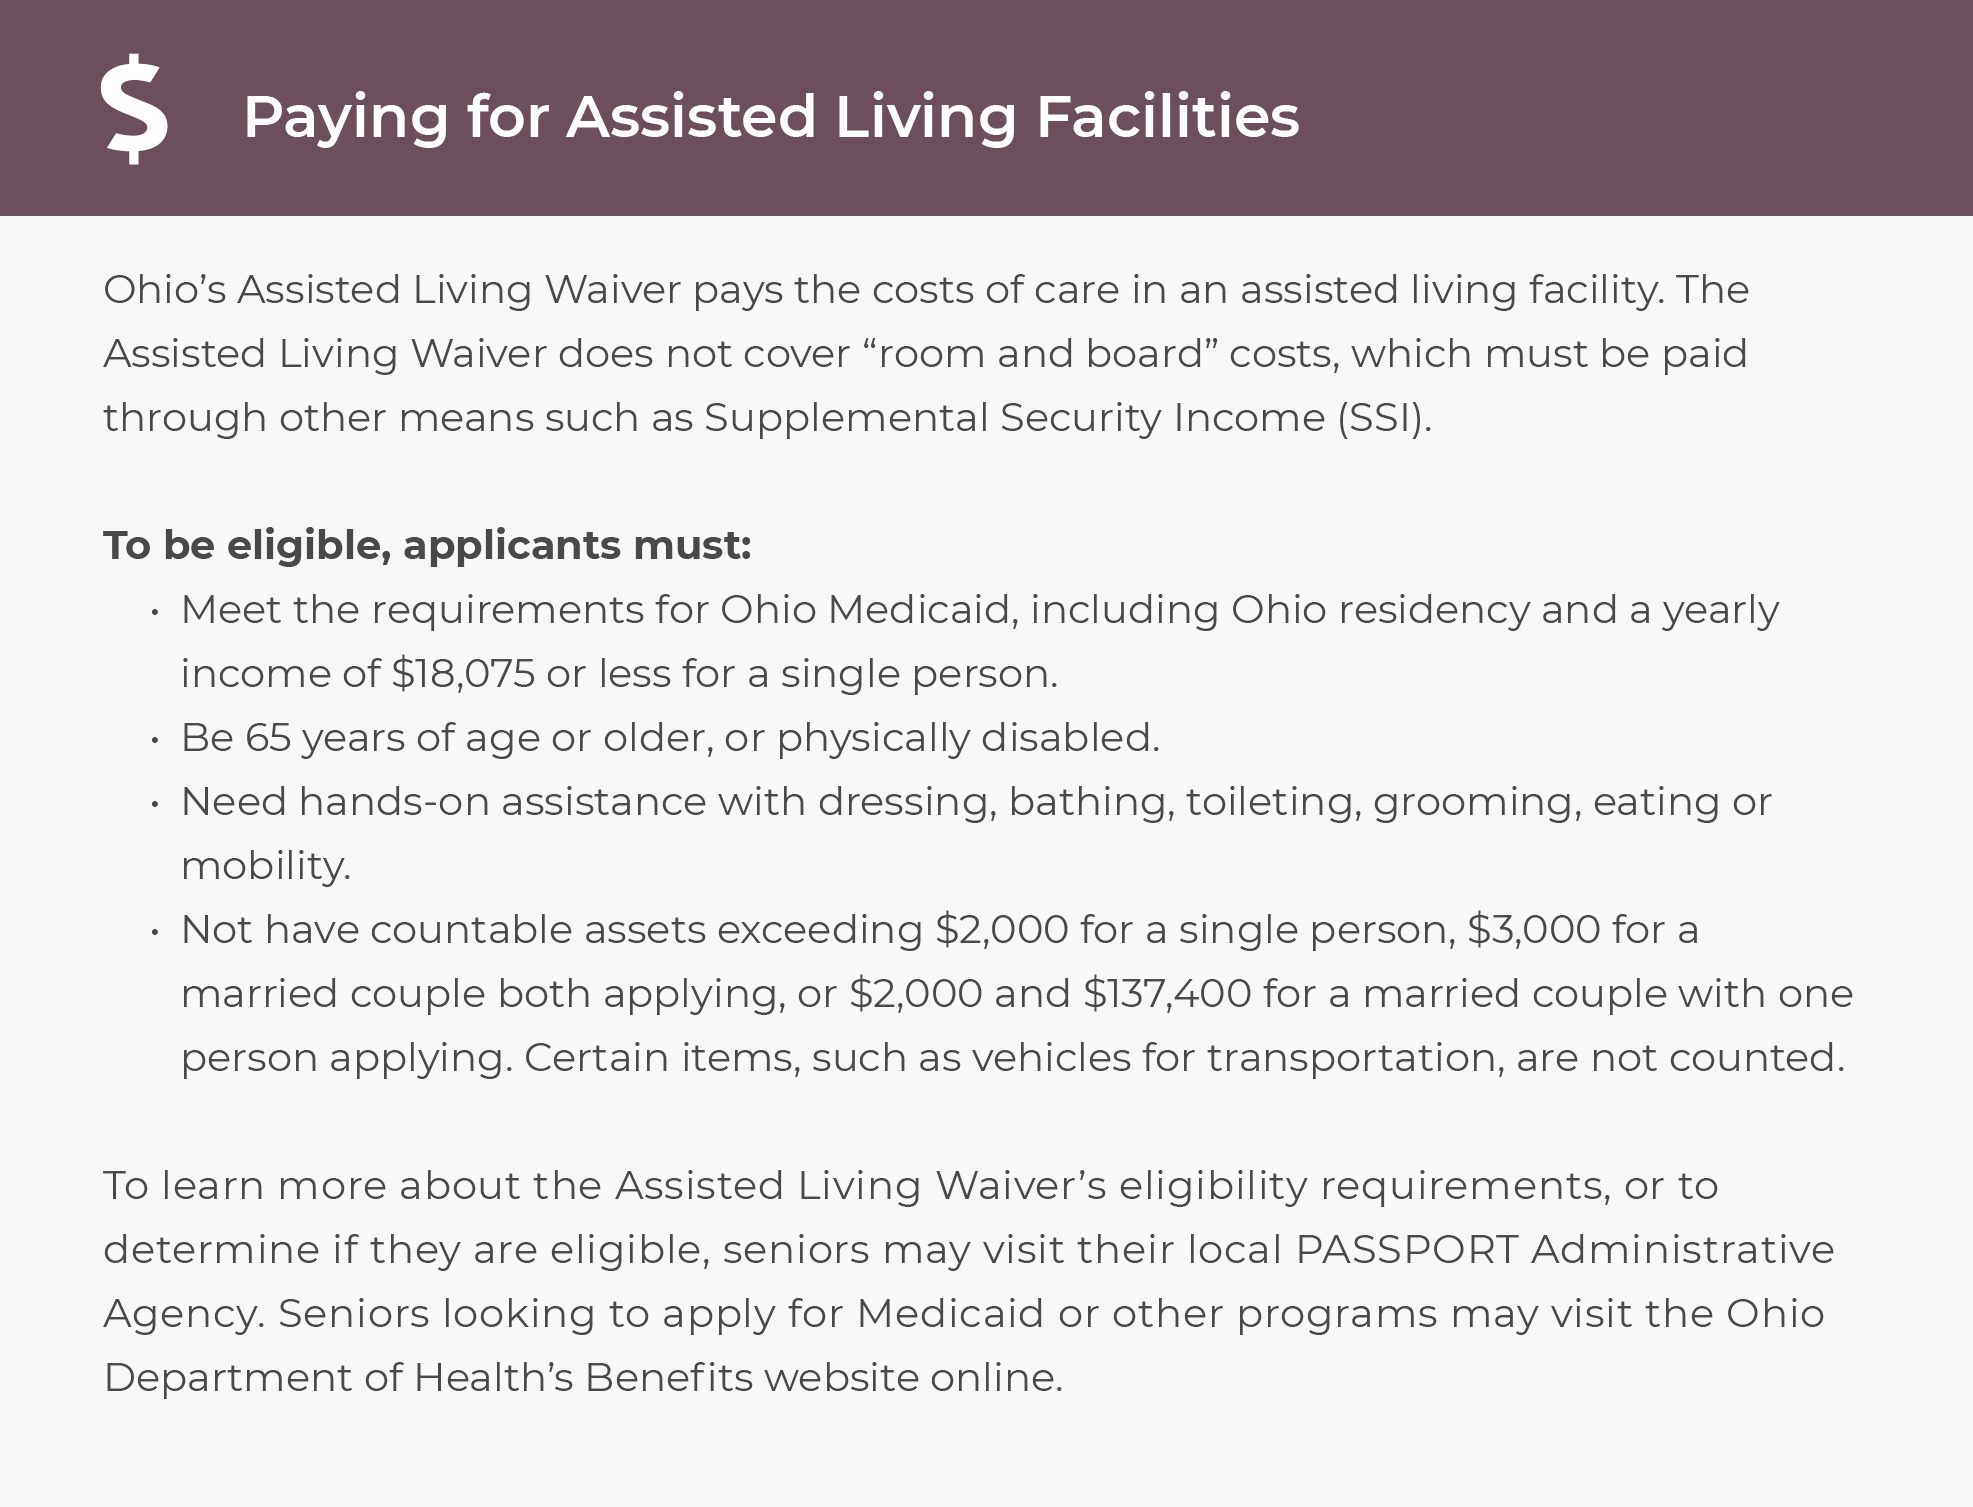 Paying for assisted living in Ohio